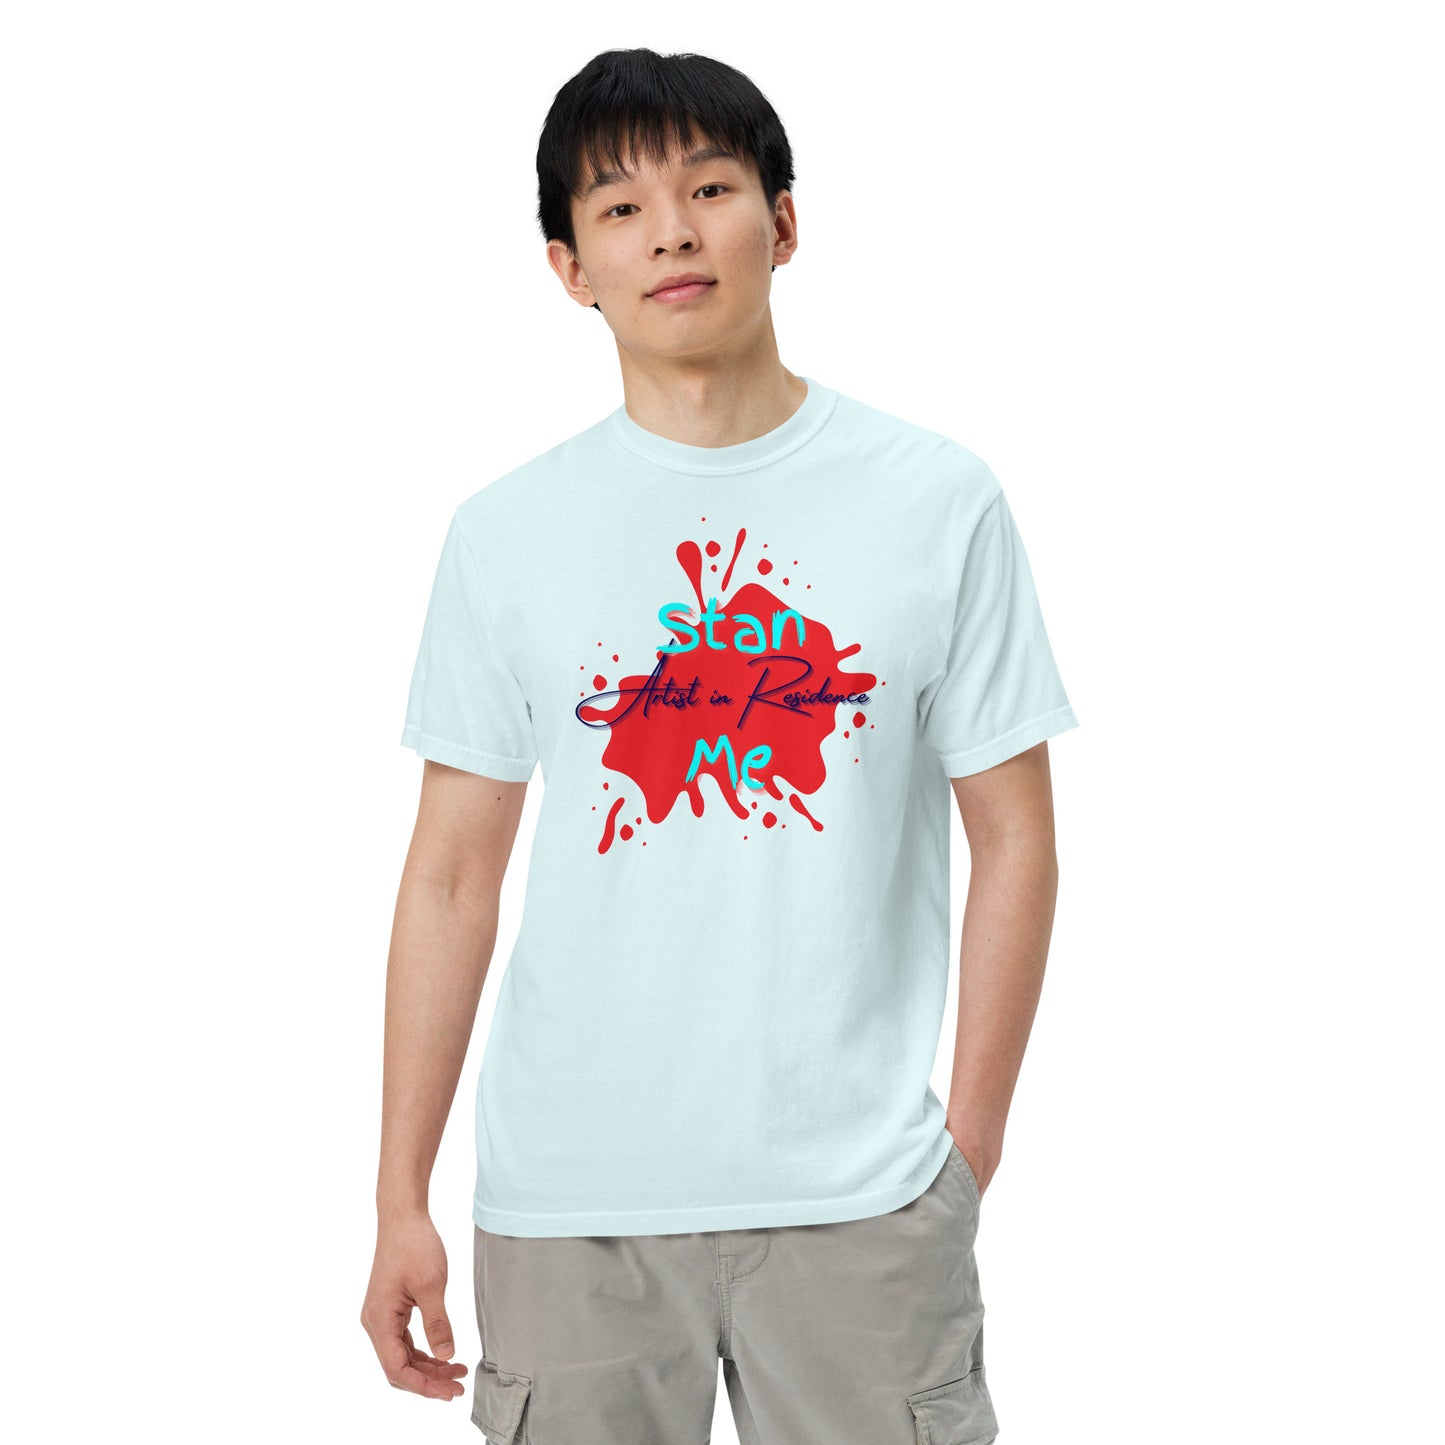 “Stan Me, Artist in Residence” tees featuring paint splatter designs, blending artistic creativity with stan culture. Available in 8 unique styles. Perfect for artists looking to attract fans and gigs. ice blue tee